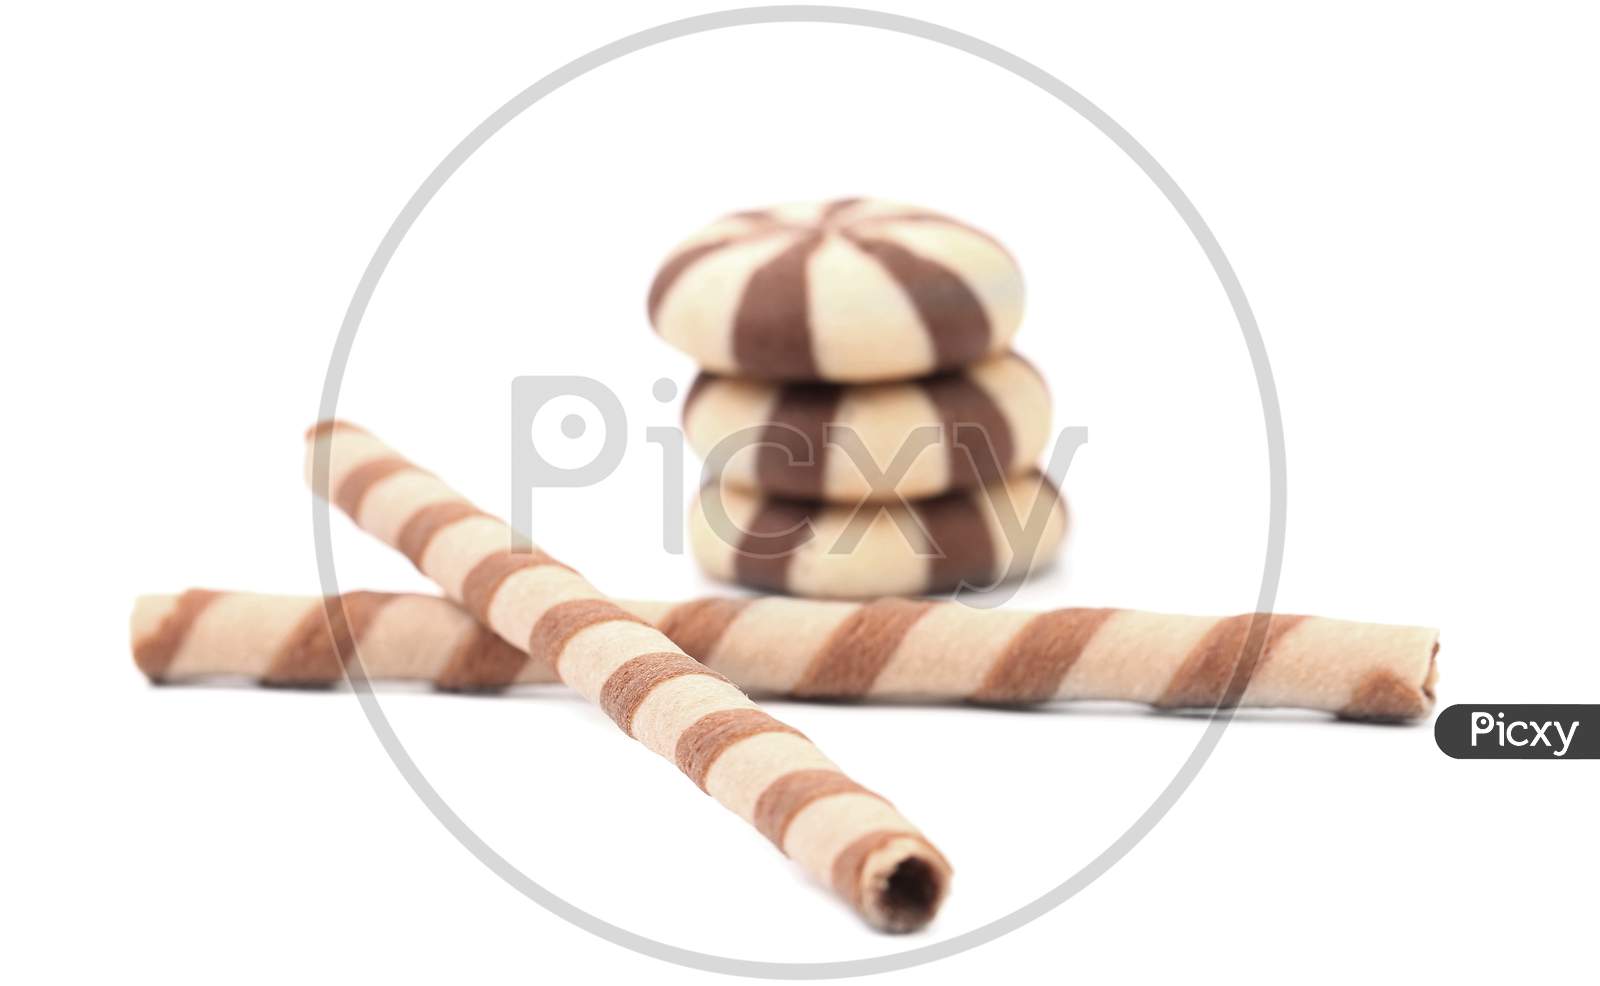 Striped Wafer Rolls And Stake Biscuits. Isolated On A White Background.